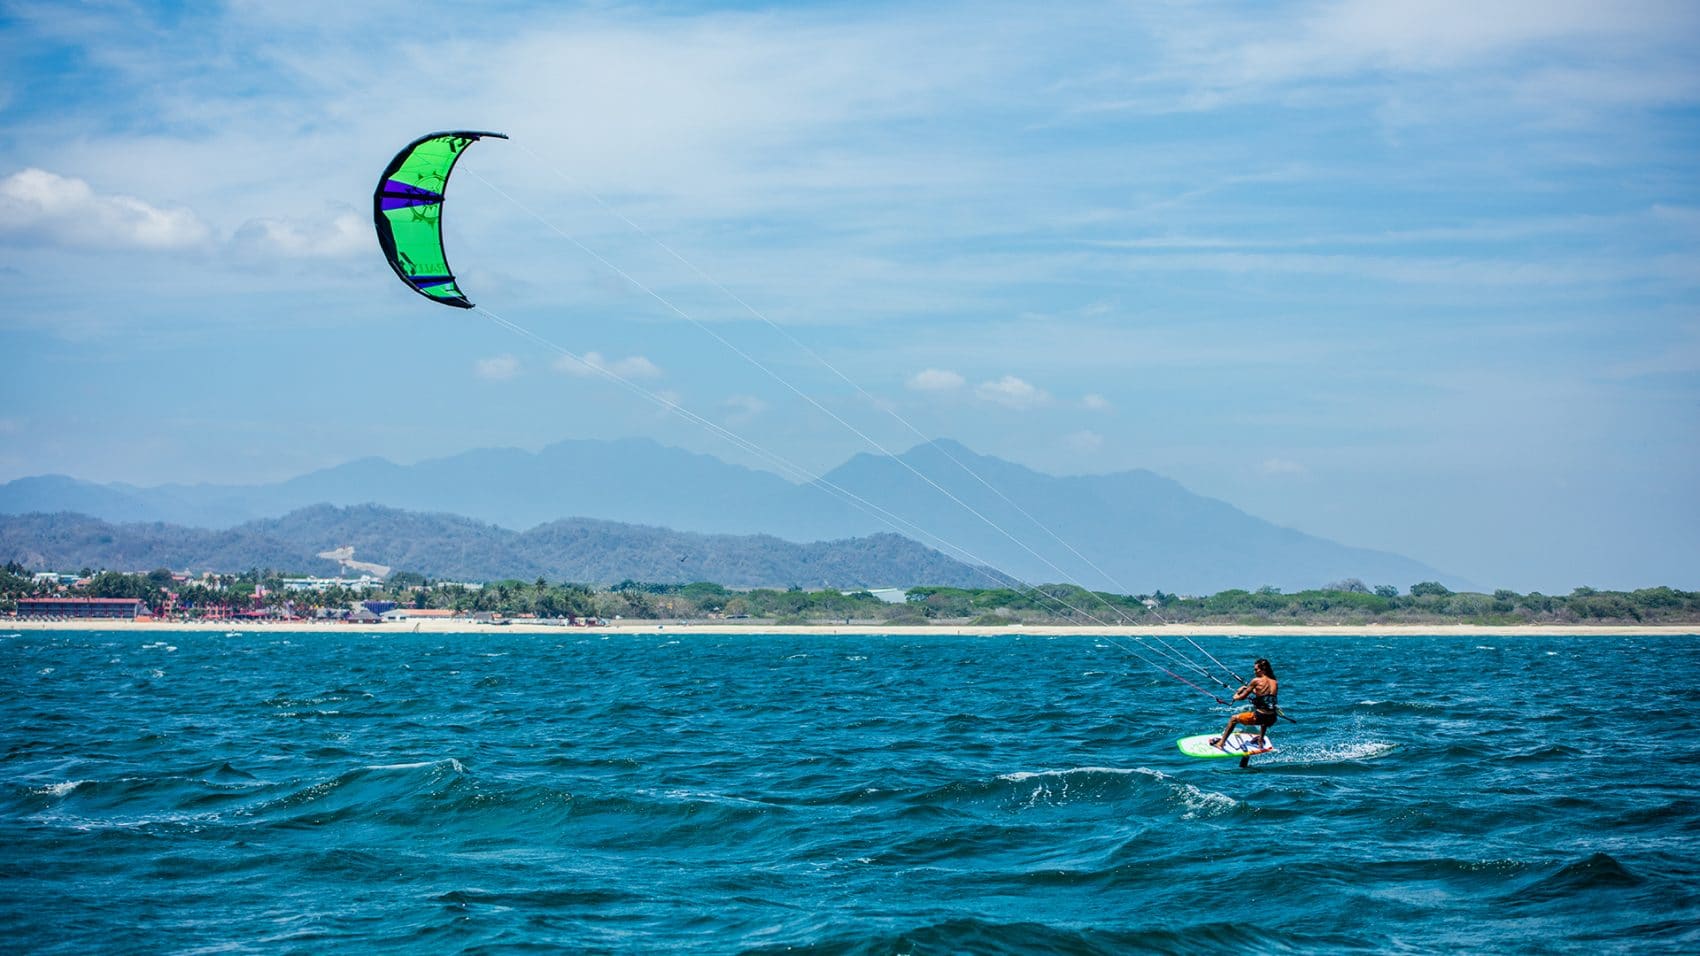 Kite surfing on the Pacific Ocean in Riviera Nayarit